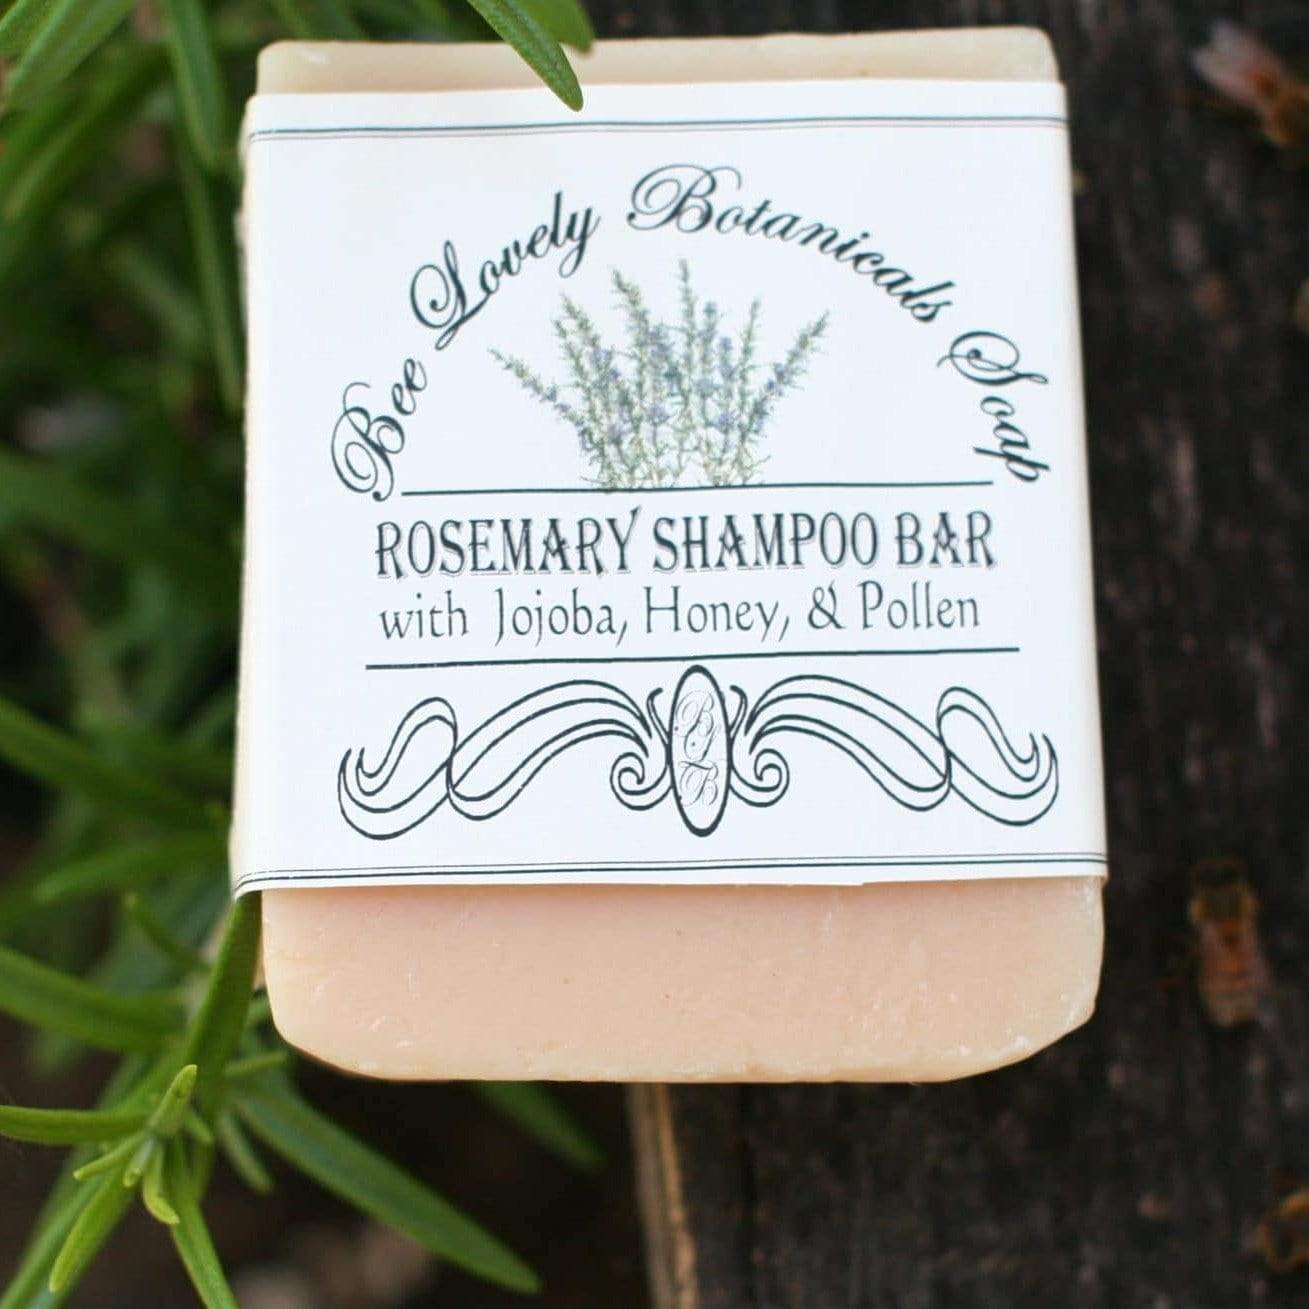 Bee Rugged Scent Destroyer Hunting Soap by Bee Lovely Botanicals